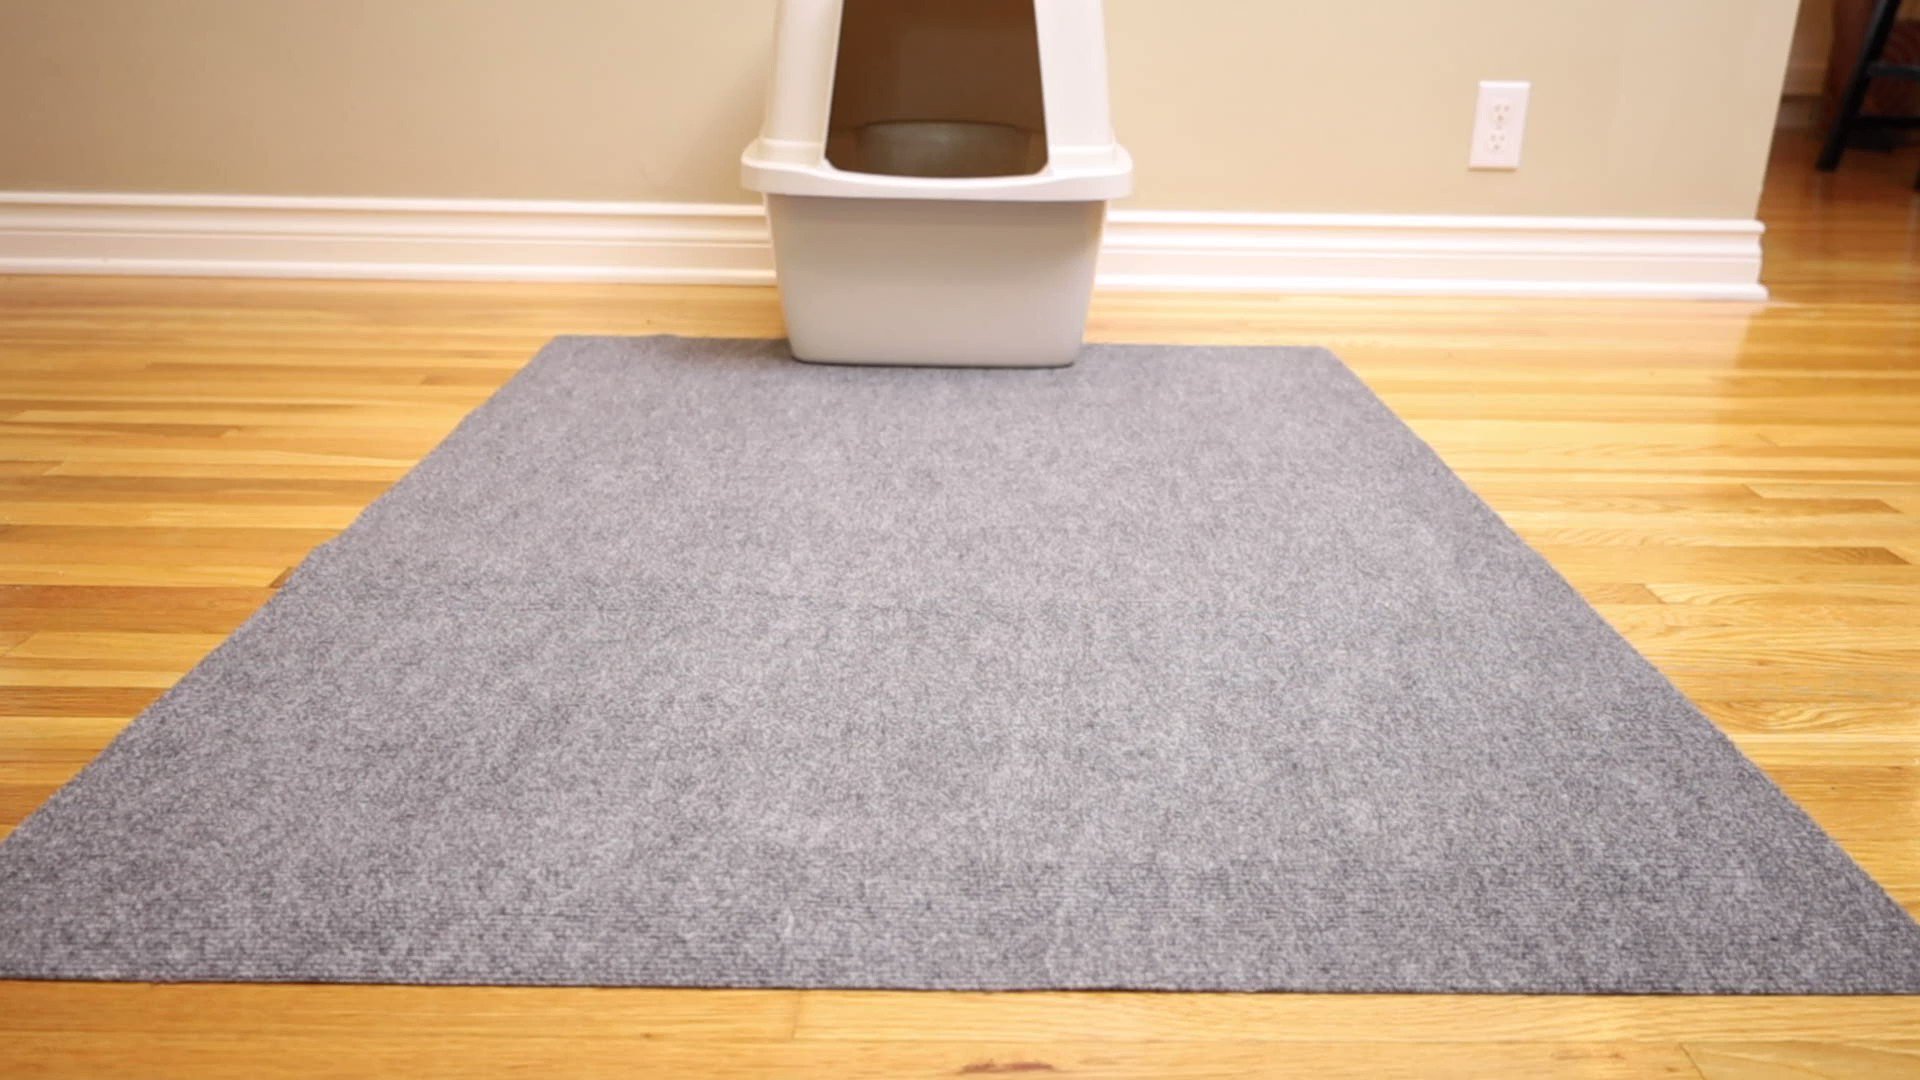 Extra Large Litter Mat - RPM Drymate - Surface Protection Products for Your  Home